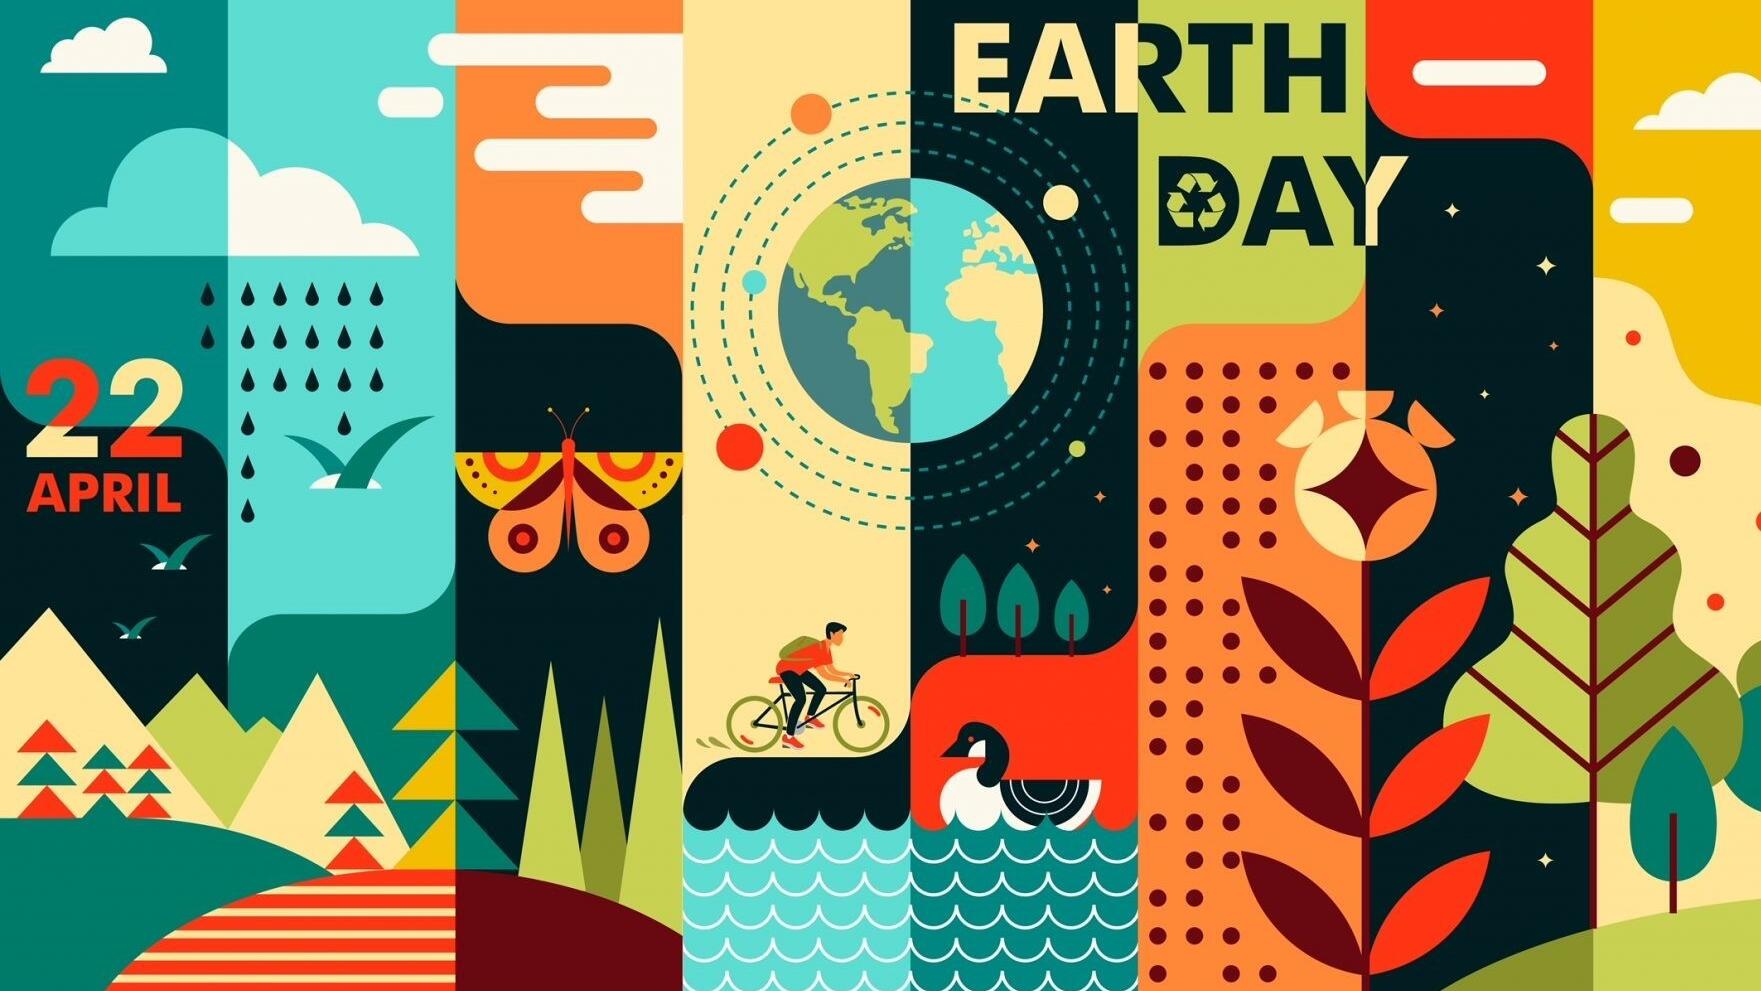 Earth Day 2021 Sustainable Development Goals Resource Centre